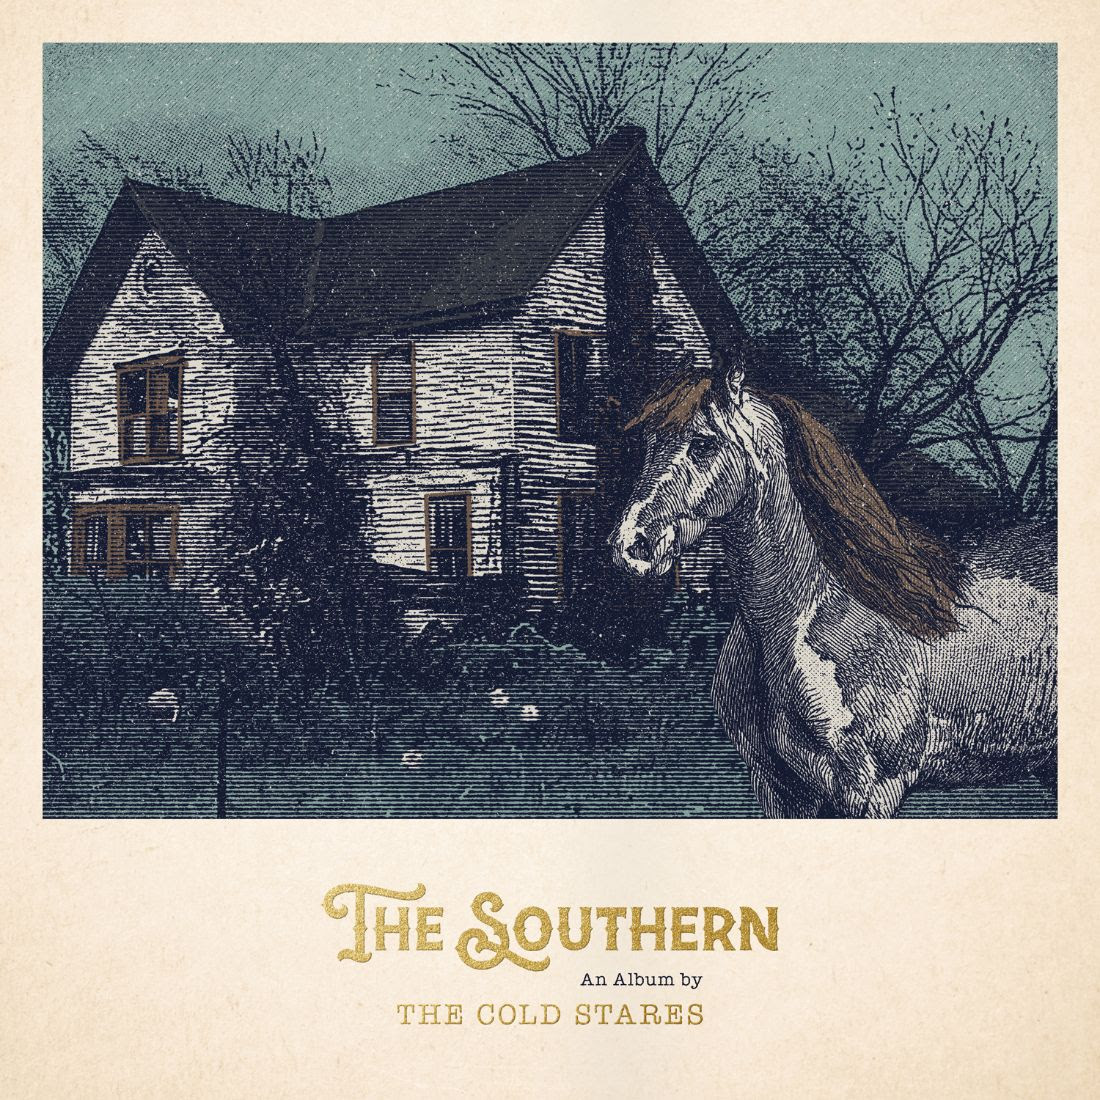 ‘The Southern’ by The Cold Stares